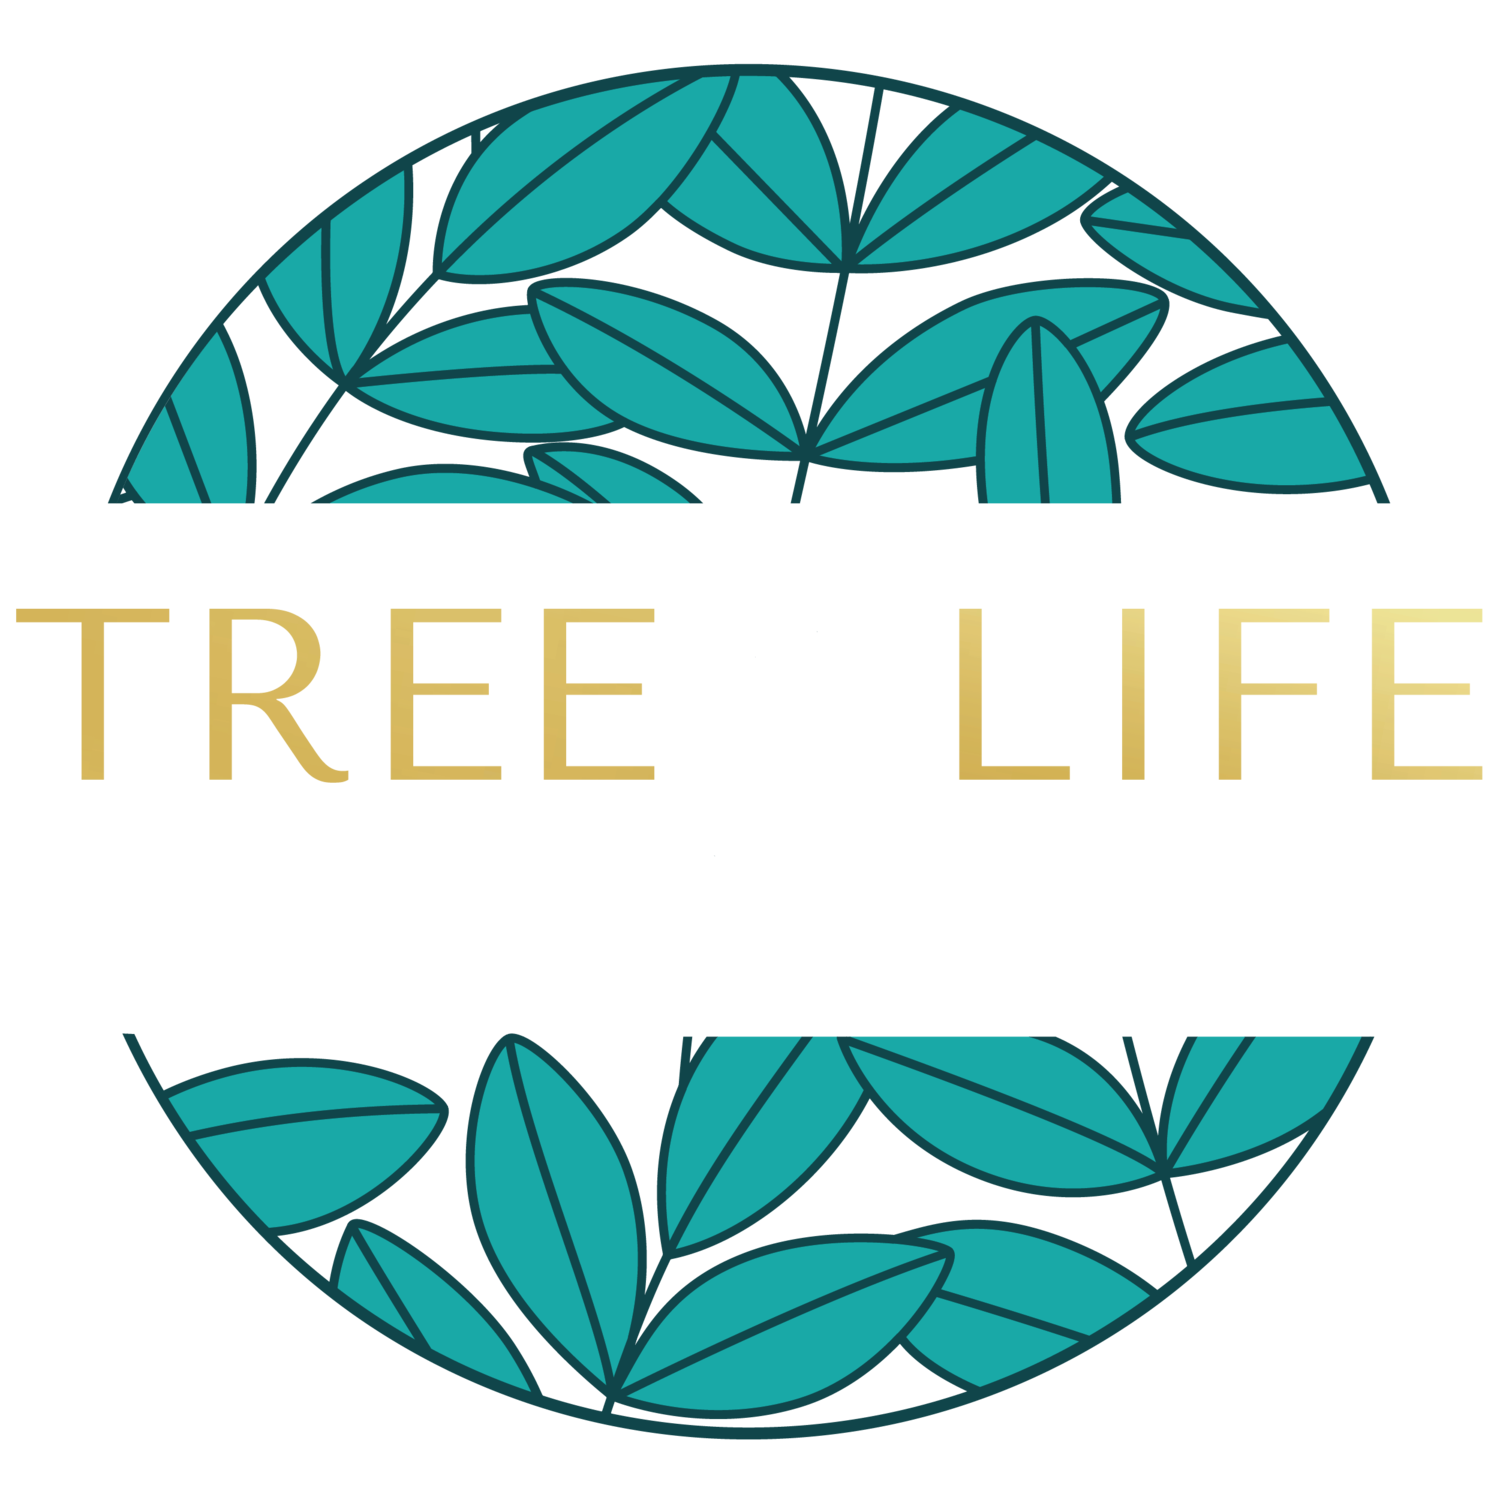 Tree of Life Counseling Center